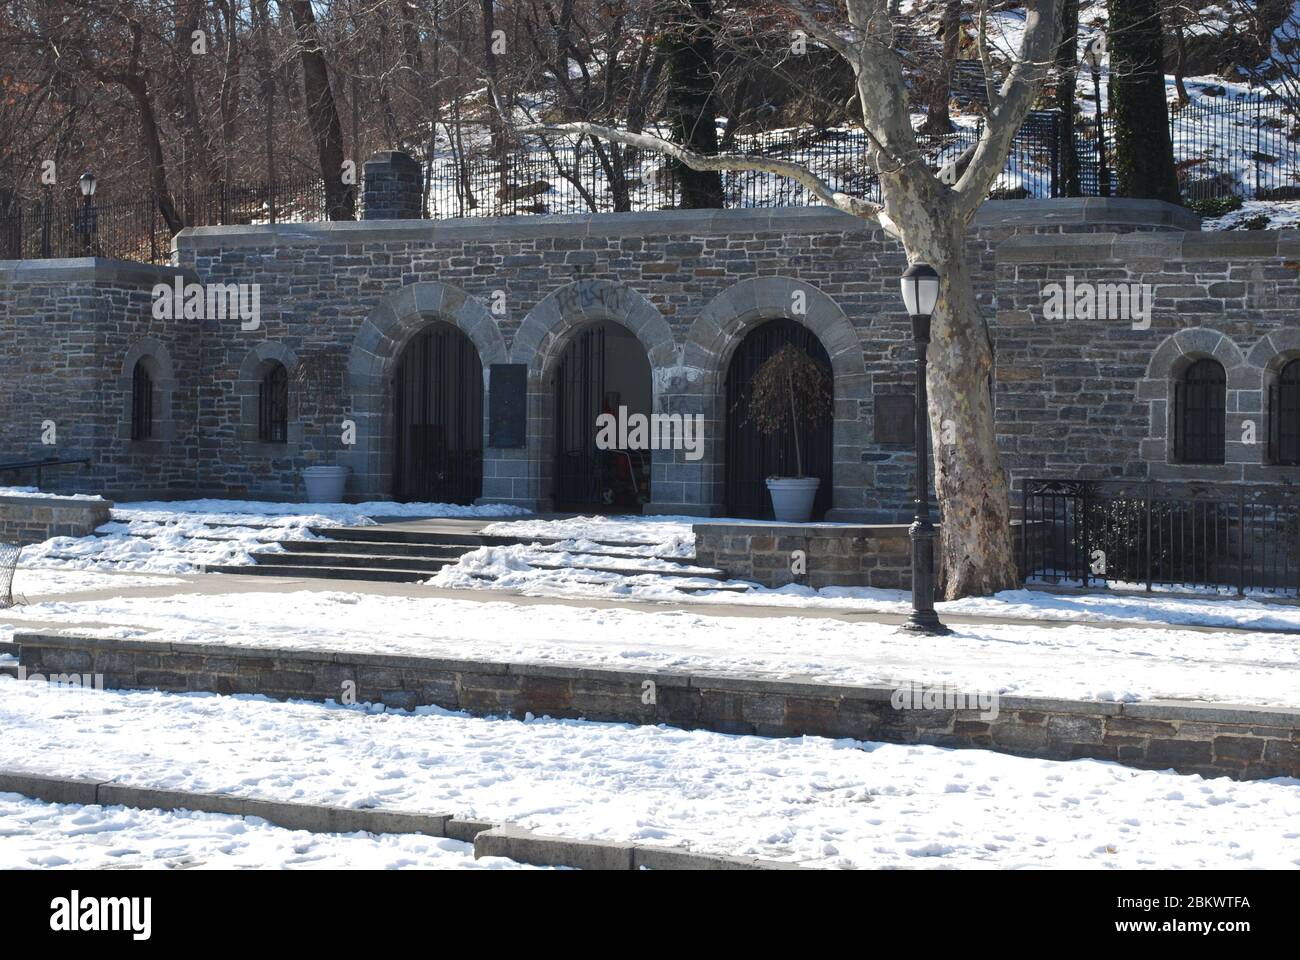 Public Space Recreation Fortification Architecture Fort Tryon Park, Riverside, Broadway, New York, NY 10040 United States designed by Olmsted Brothers Stock Photo